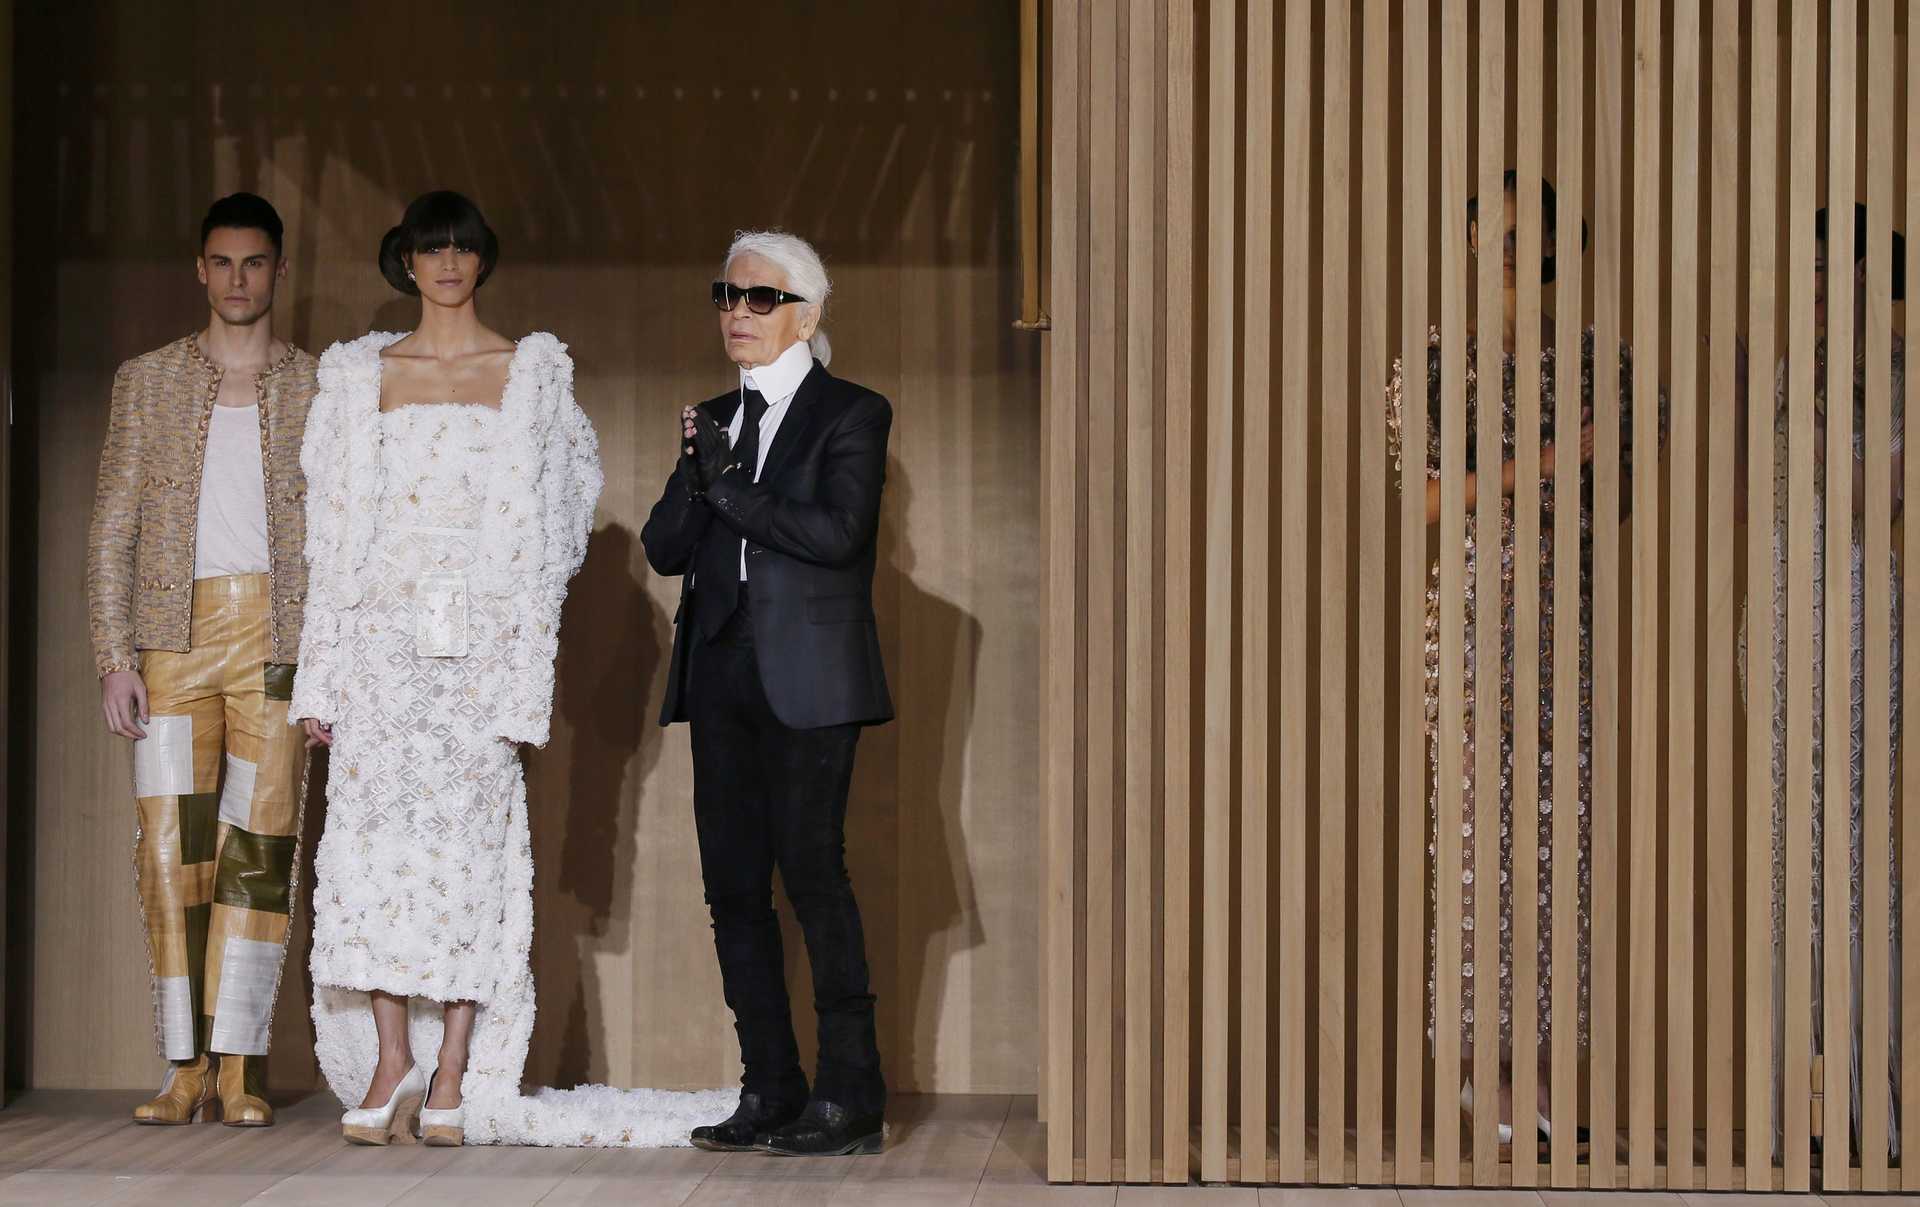 German designer Karl Lagerfeld appears at the end his Haute Couture Spring/Summer 2016 collection for fashion house Chanel at the Grand Palais in Paris